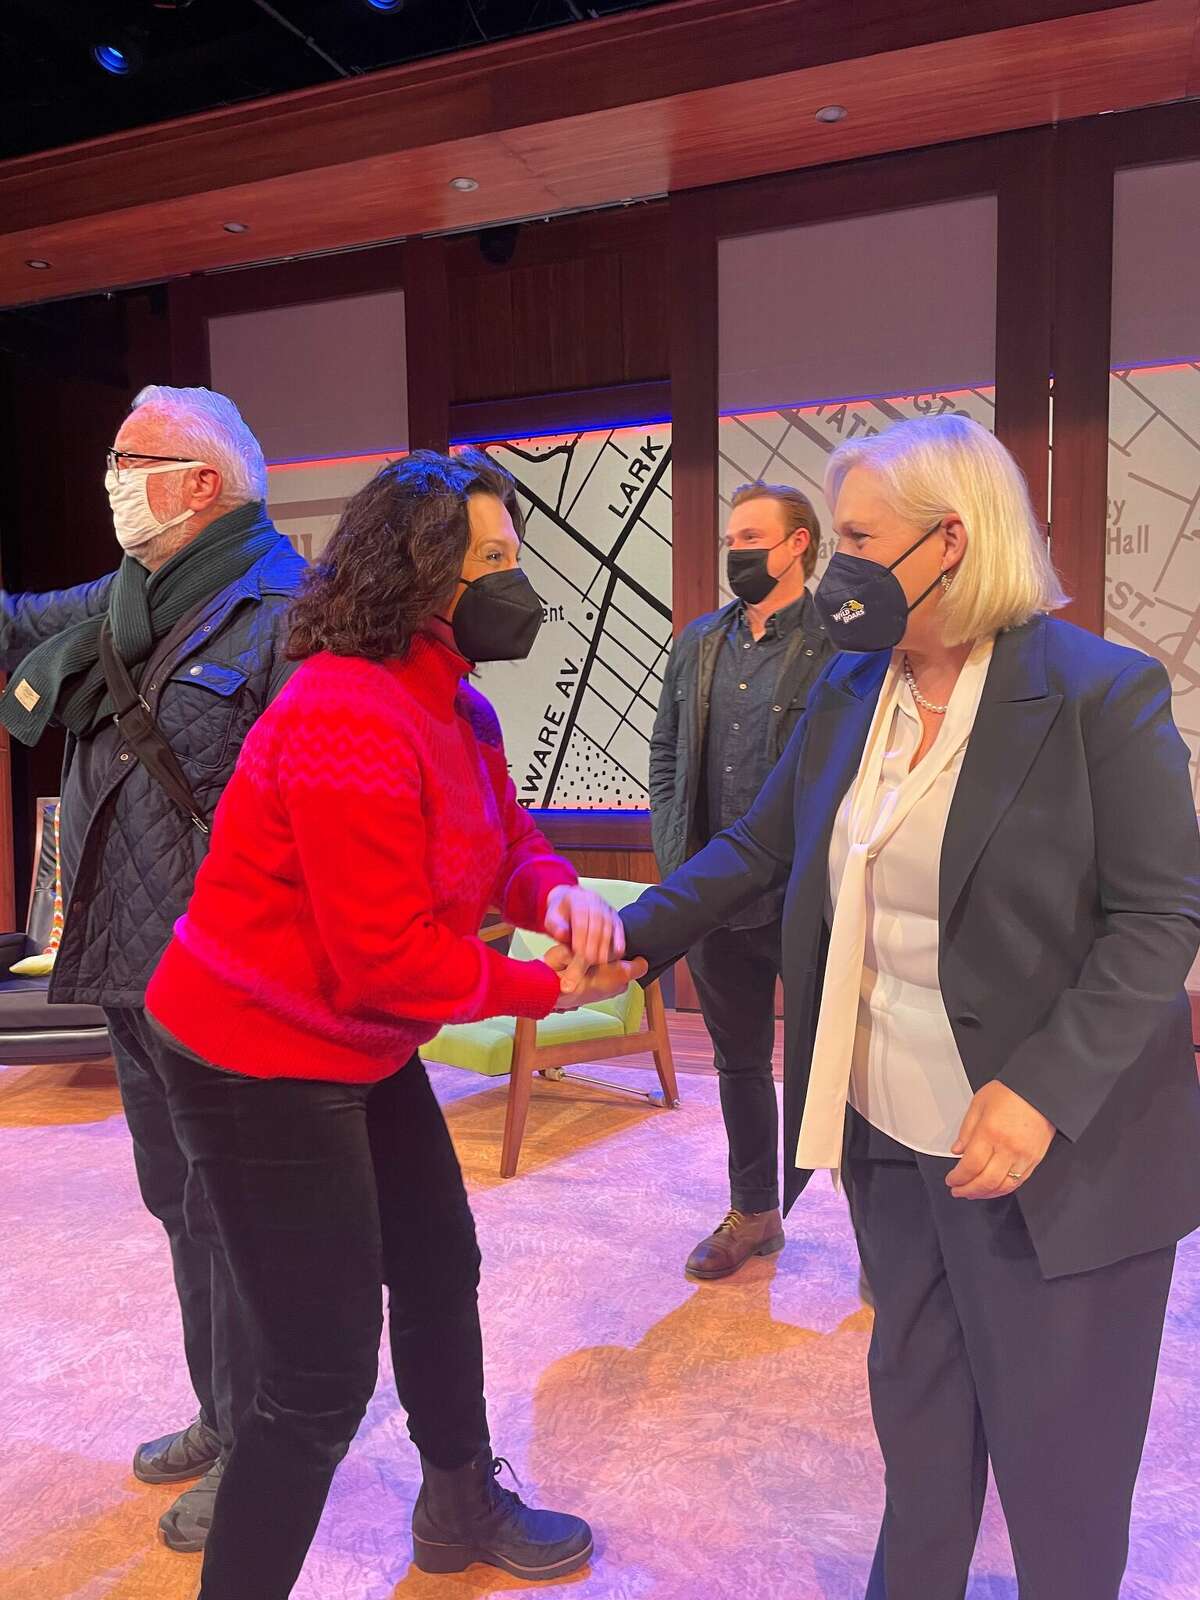 Antoinette LaVecchia, left, greets Sen. Kirsten Gillibrand with other members of the cast of the play “The True” on the stage of Capital Repertory Theatre in Albany following the April 9, 2022, matinee performance. Set in 1977, the play focuses on longtime Albany Mayor Erastus Corning 2nd and his most trusted aide, Polly Noonan. Gillibrand is Noonan’s granddaughter, and LaVecchia plays Noonan. “The True” runs through April 24. 